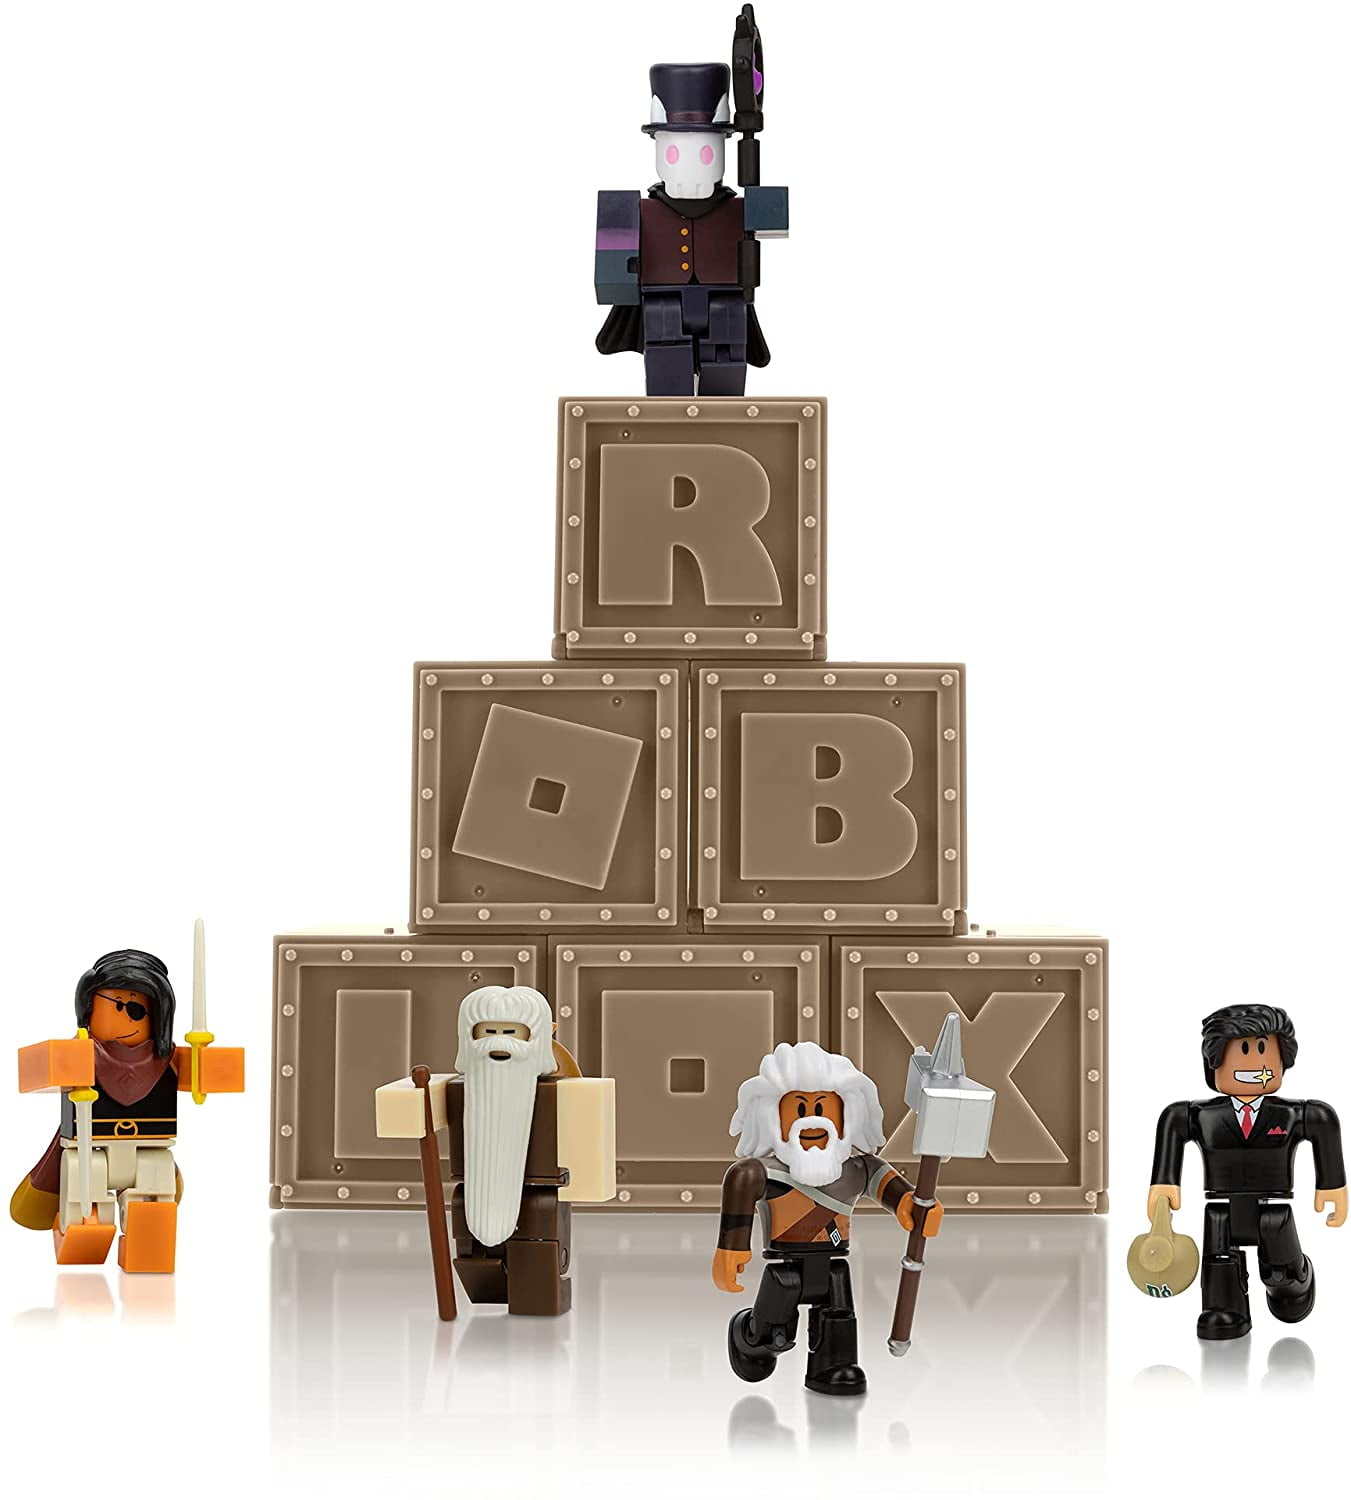 Roblox Action Collection - Advent Calendar [Includes 2 Exclusive Virtual  Items]